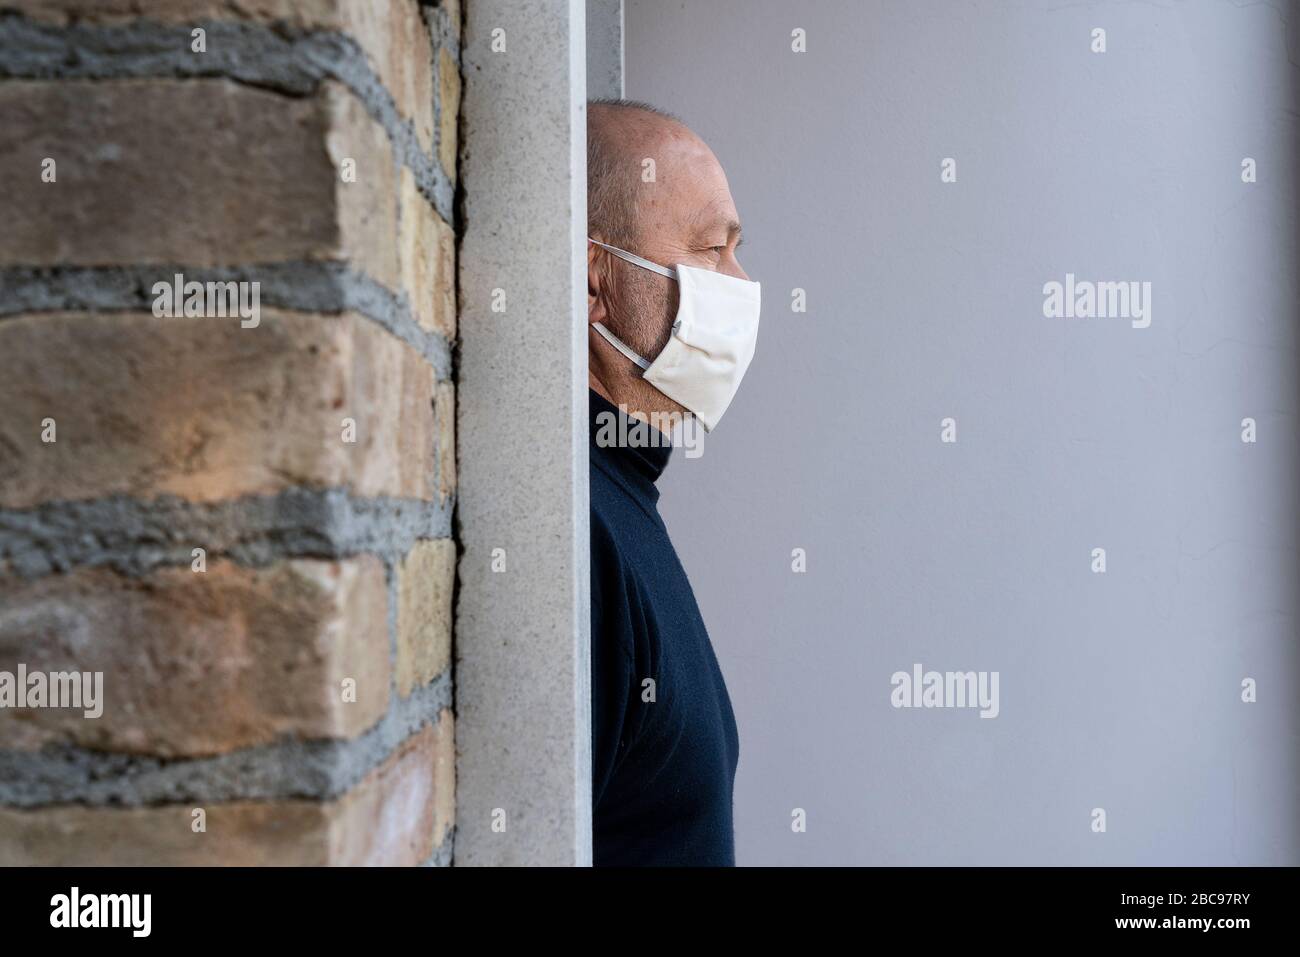 a man who leaves home with a protective mask over his mouth during the coronavirus pandemic Stock Photo